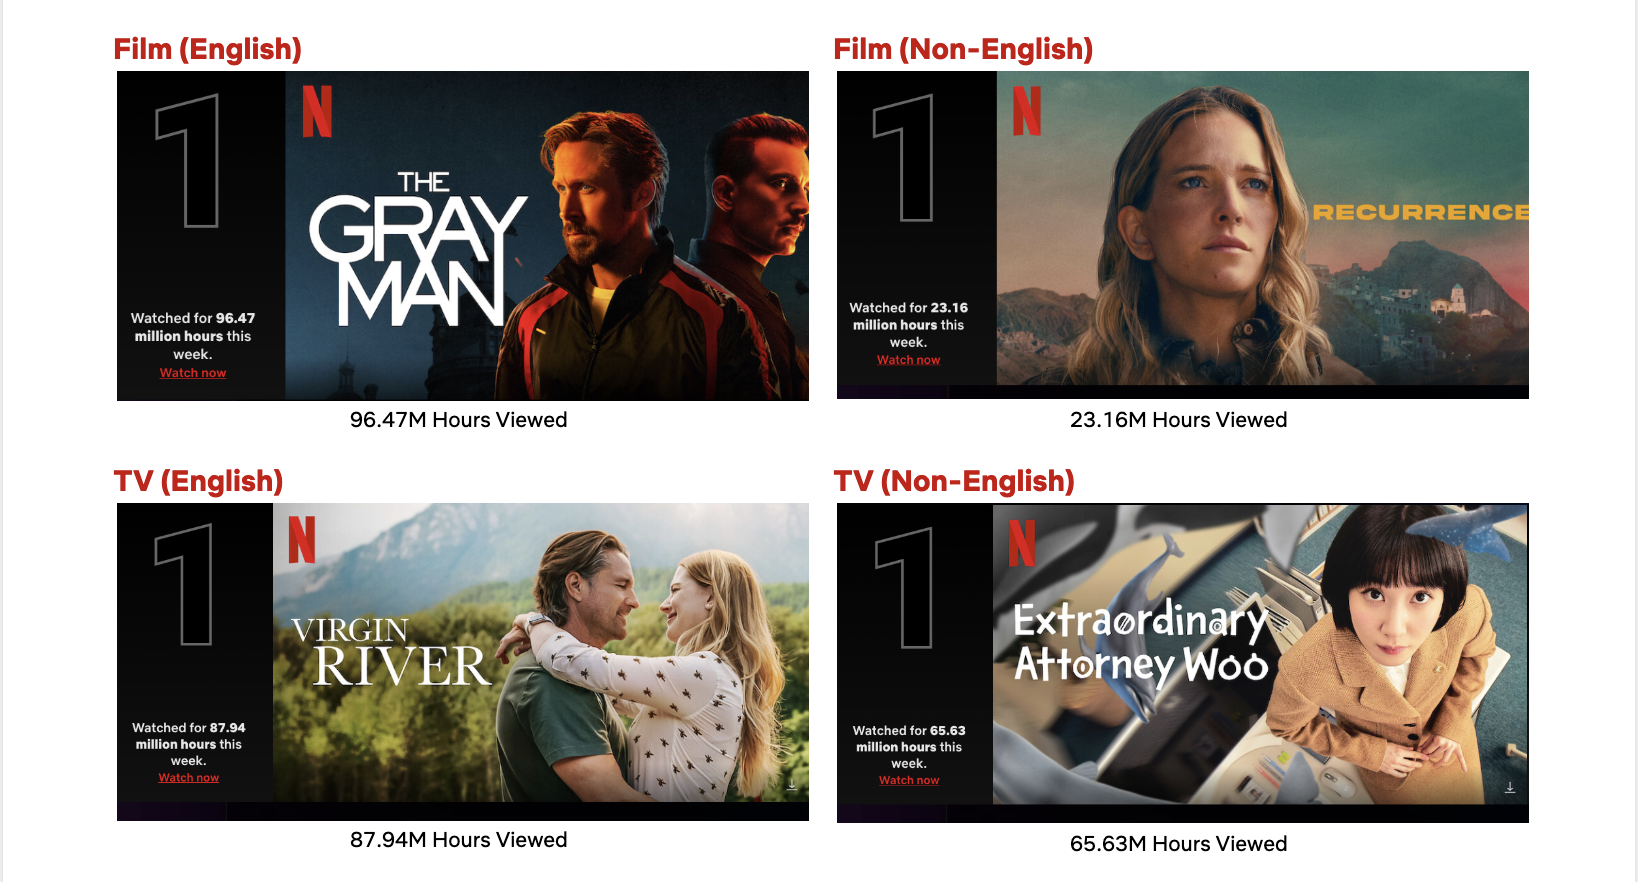 Top 10 Week of July 25: ‘The Gray Man’ and ‘Virgin River’ Stay Atop the Film and TV Lists